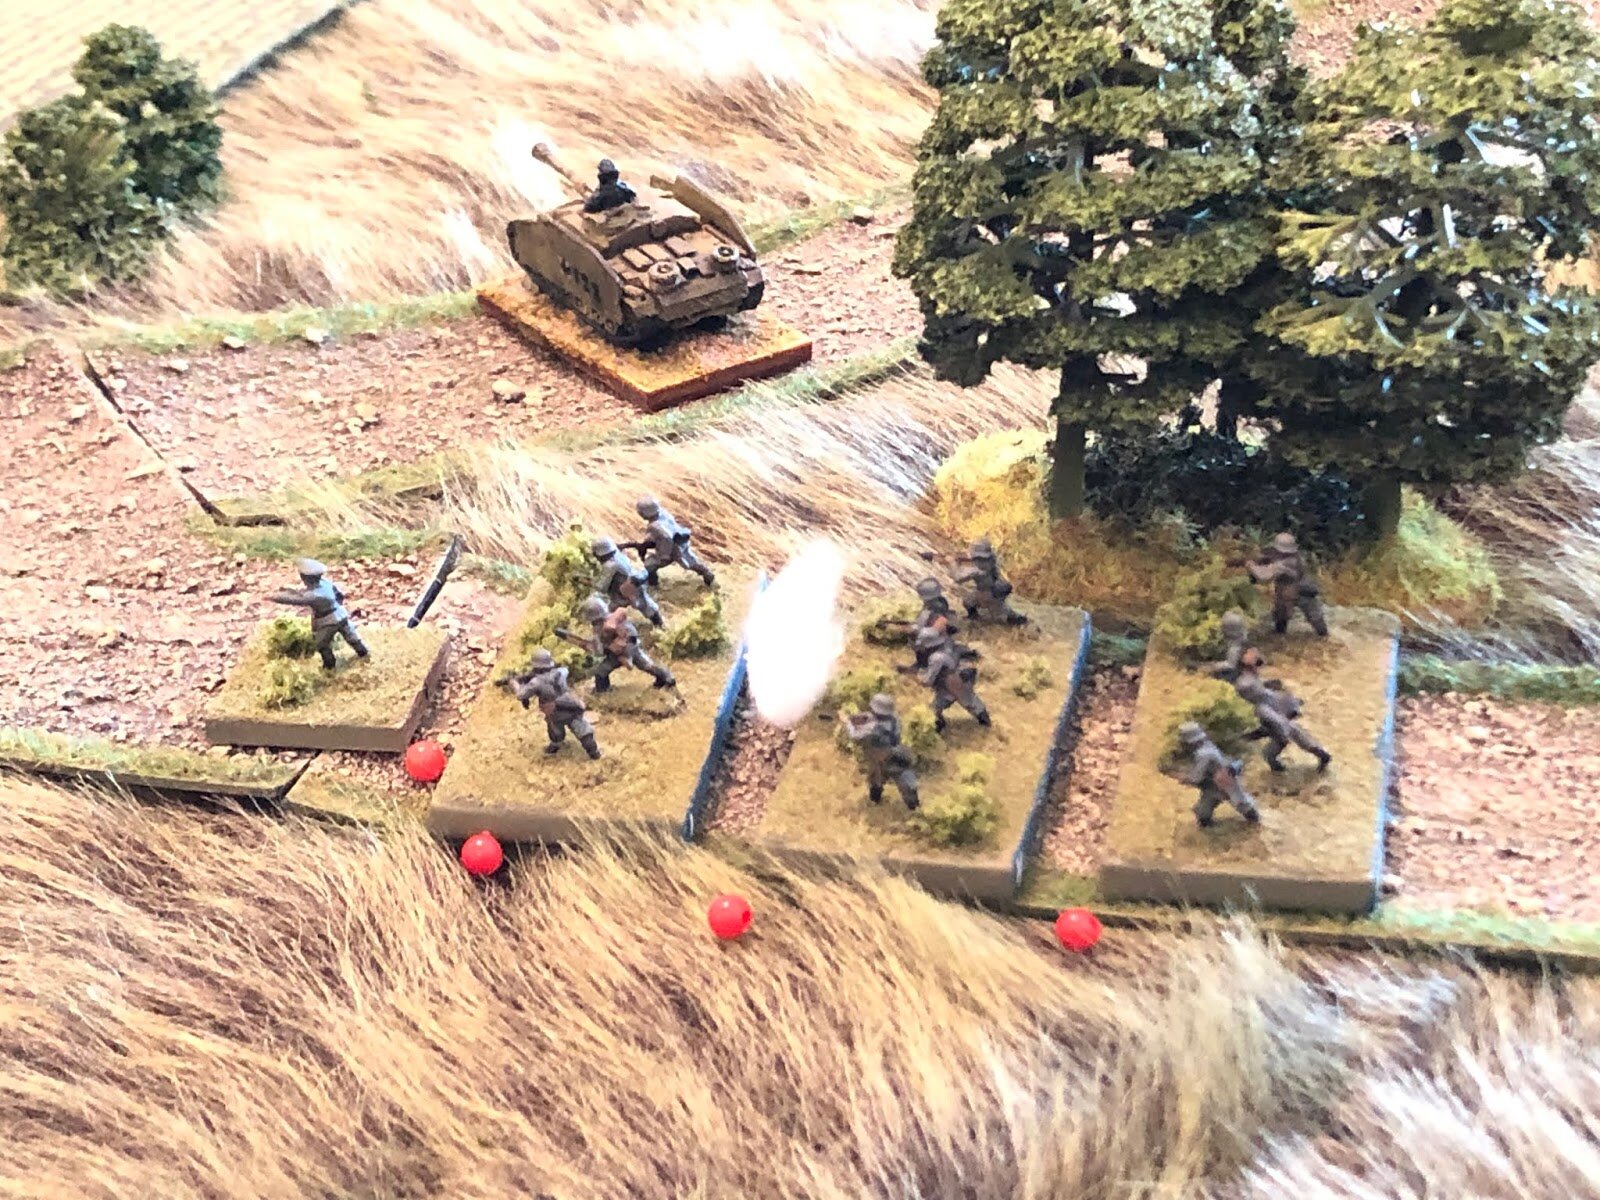 The 82mm round hits dead in the middle of the German 1st Platoon, 1st Company, suppressing the whole damn mess!